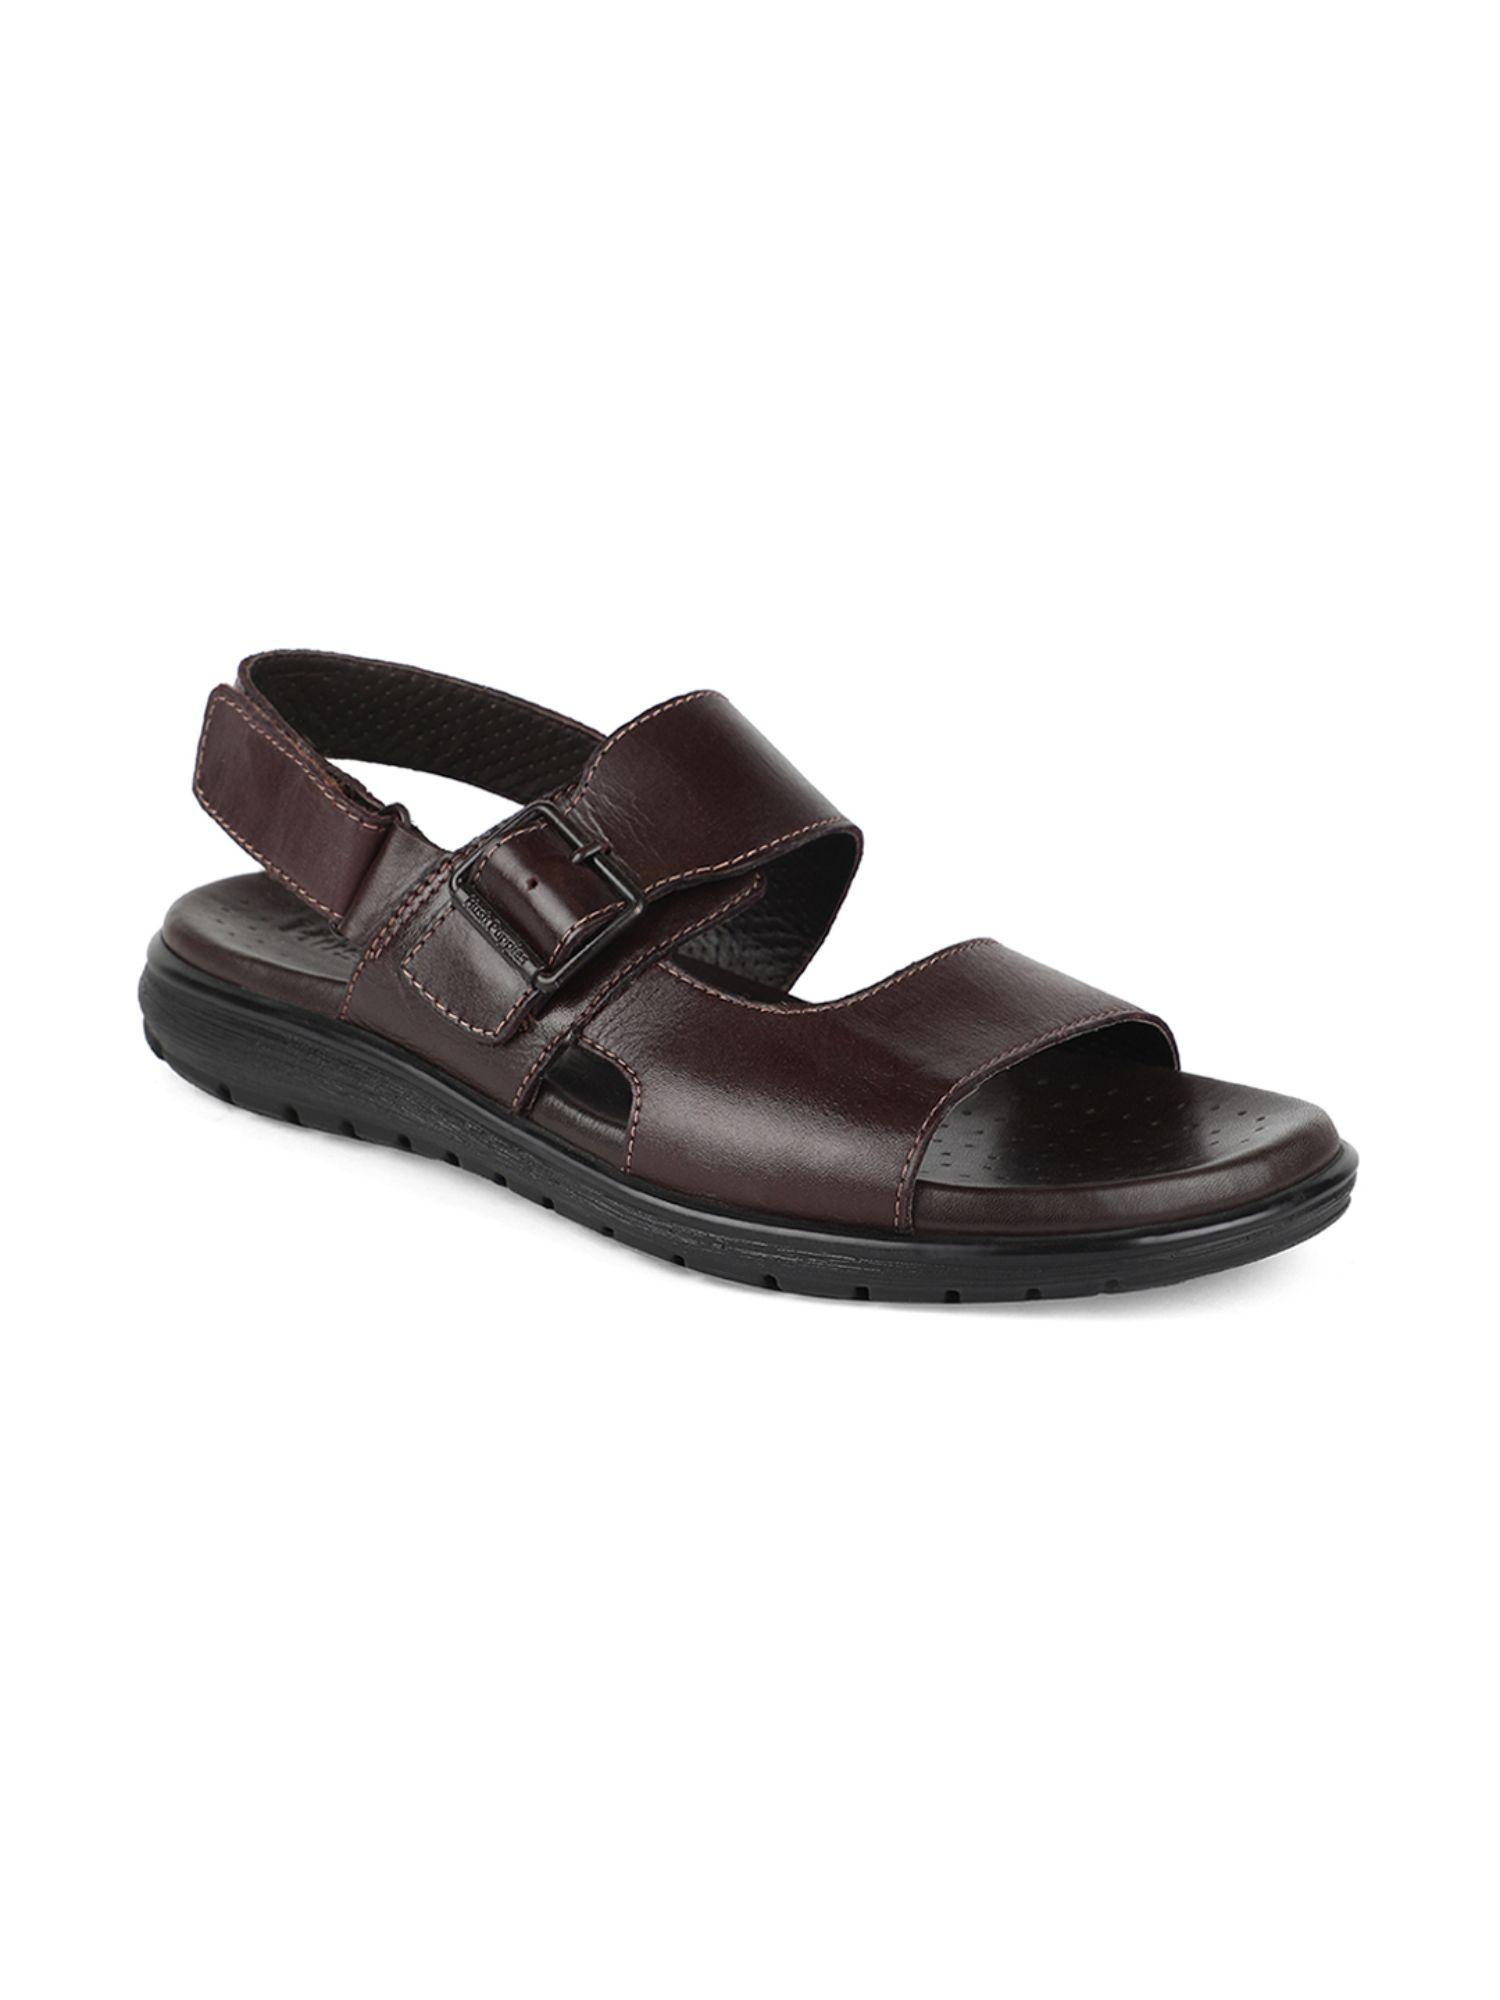 solid brown sandals